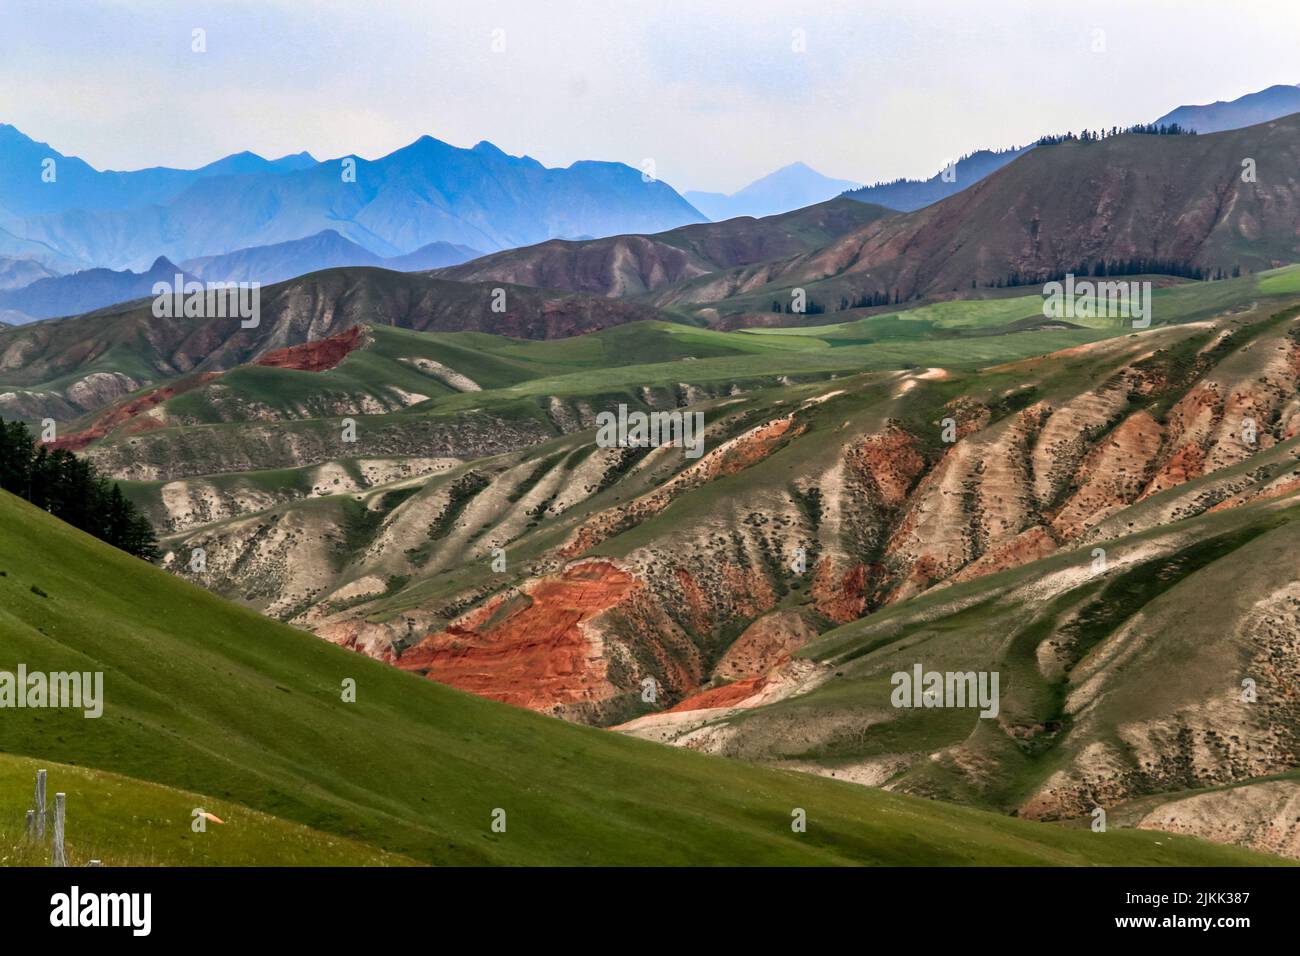 A beautiful landscape view of the green meadows Qilian Shan Mountain range in China with blue sky Stock Photo